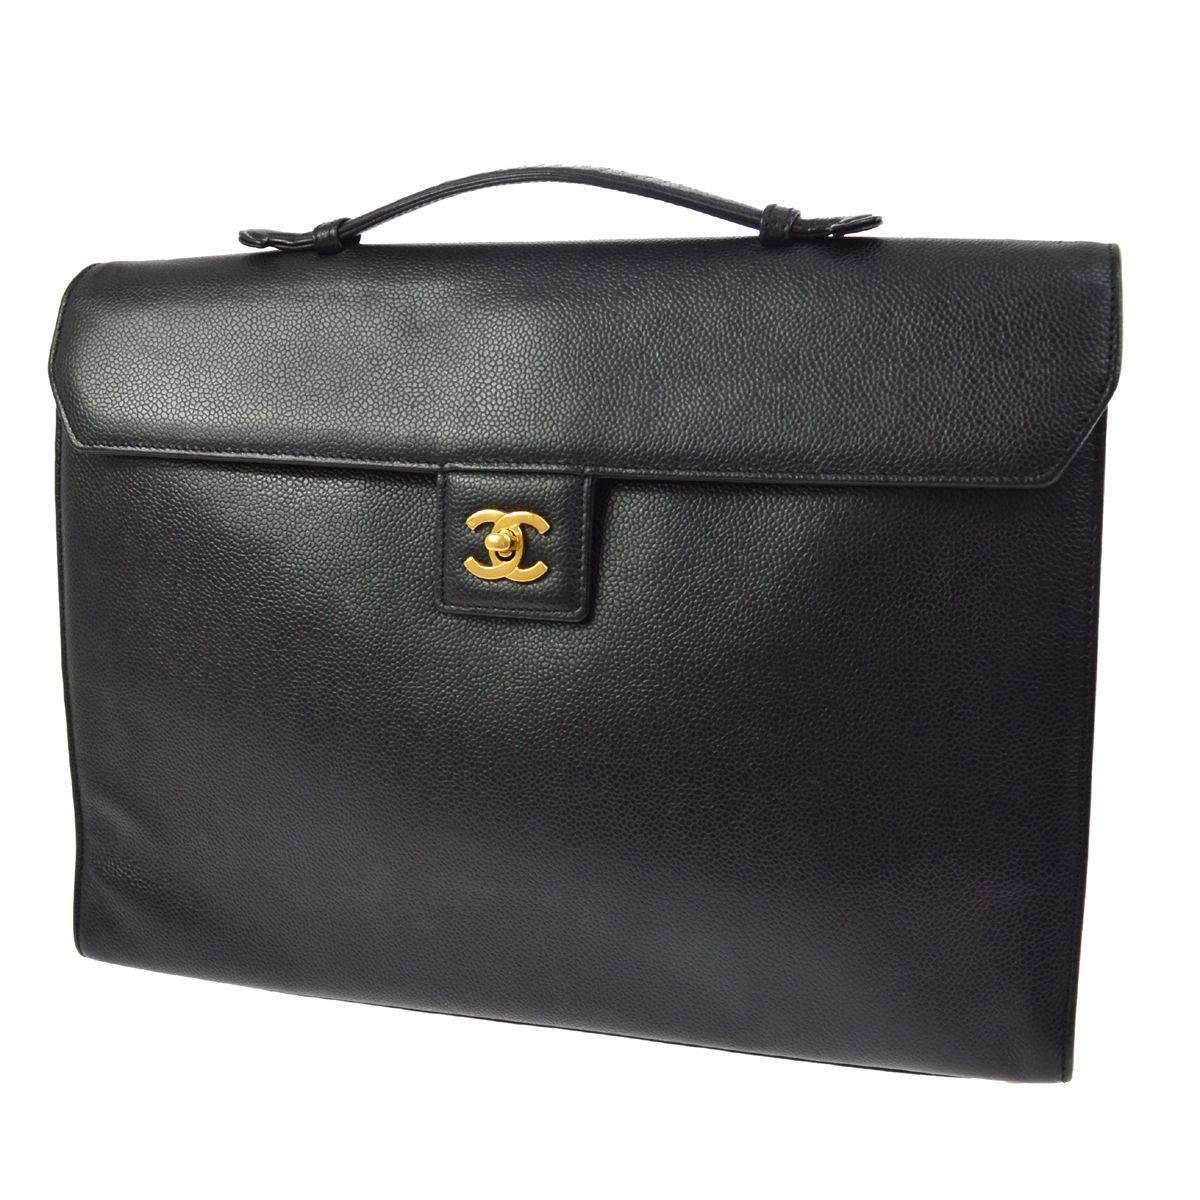 Chanel Back Leather Top Handle Men's Women's Business Travel Briefcase Bag